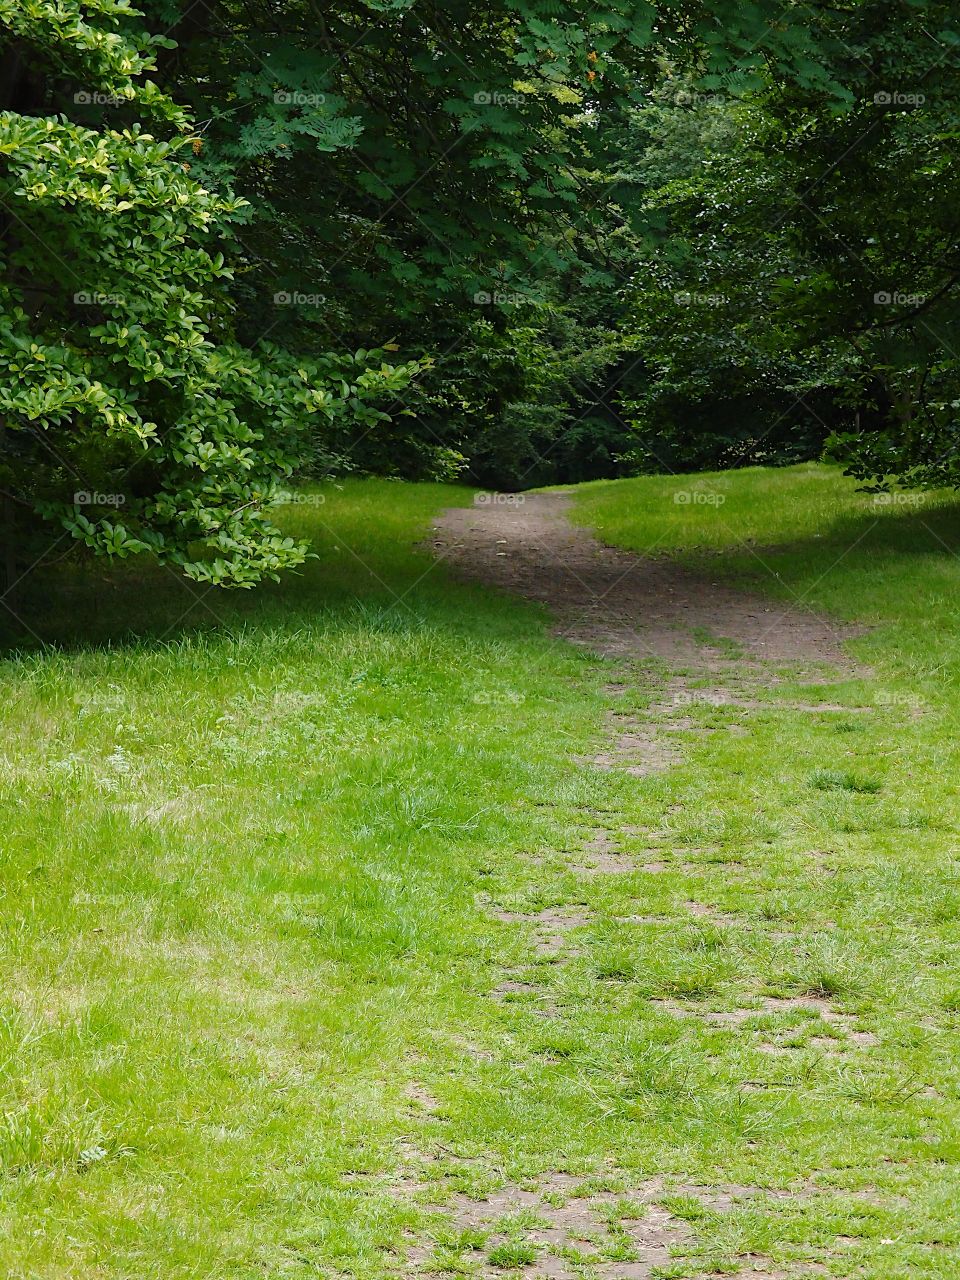 A dirt path winds through the grass and trees in the beautiful English countryside. 